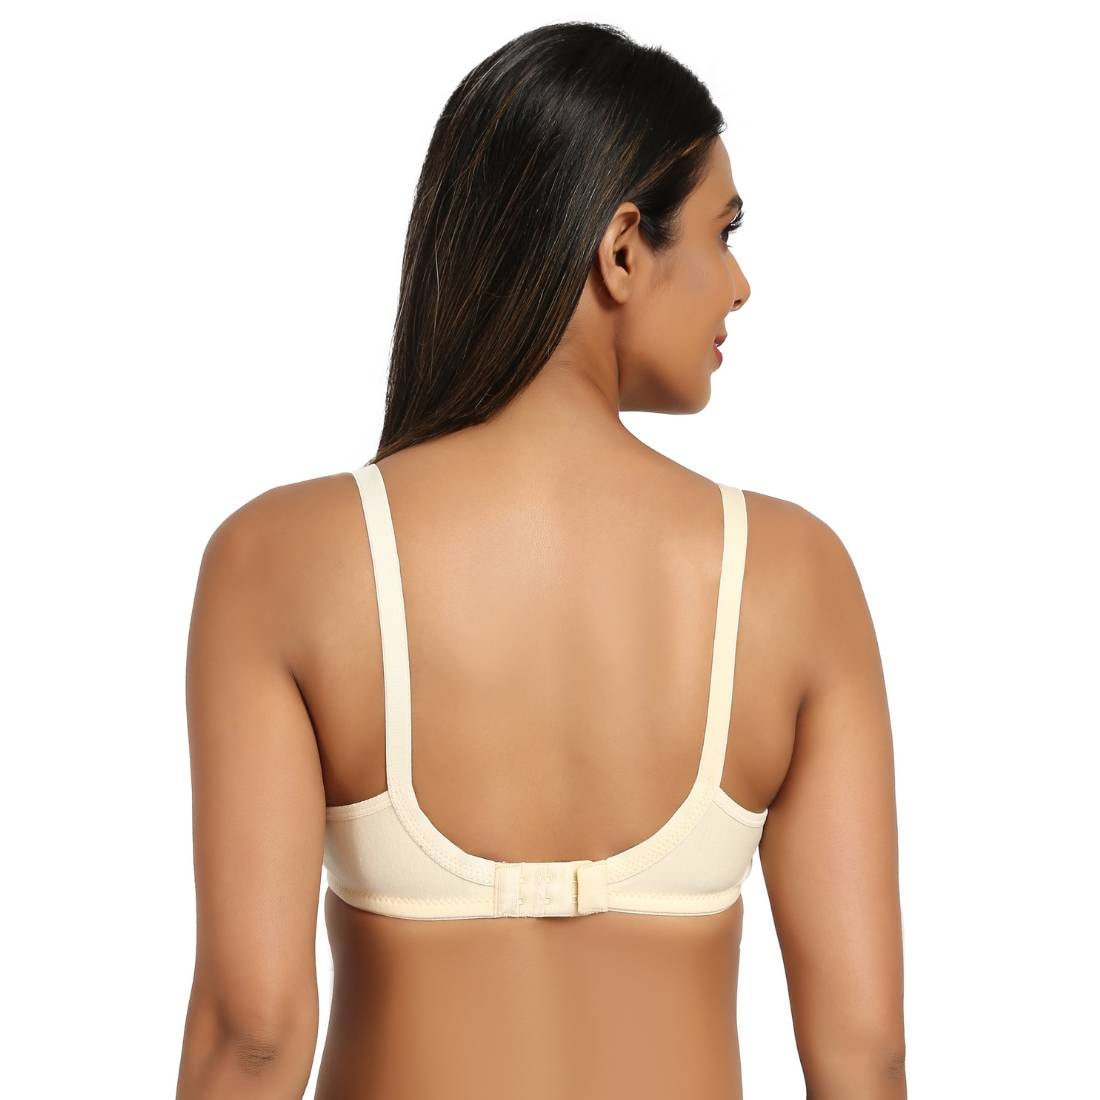 Maternity/Nursing Bras Non-Wired, Non-Padded - Pack of 3 with free Bra Extender (Classic Black, Classic White, Magnolia Cream) 38 C